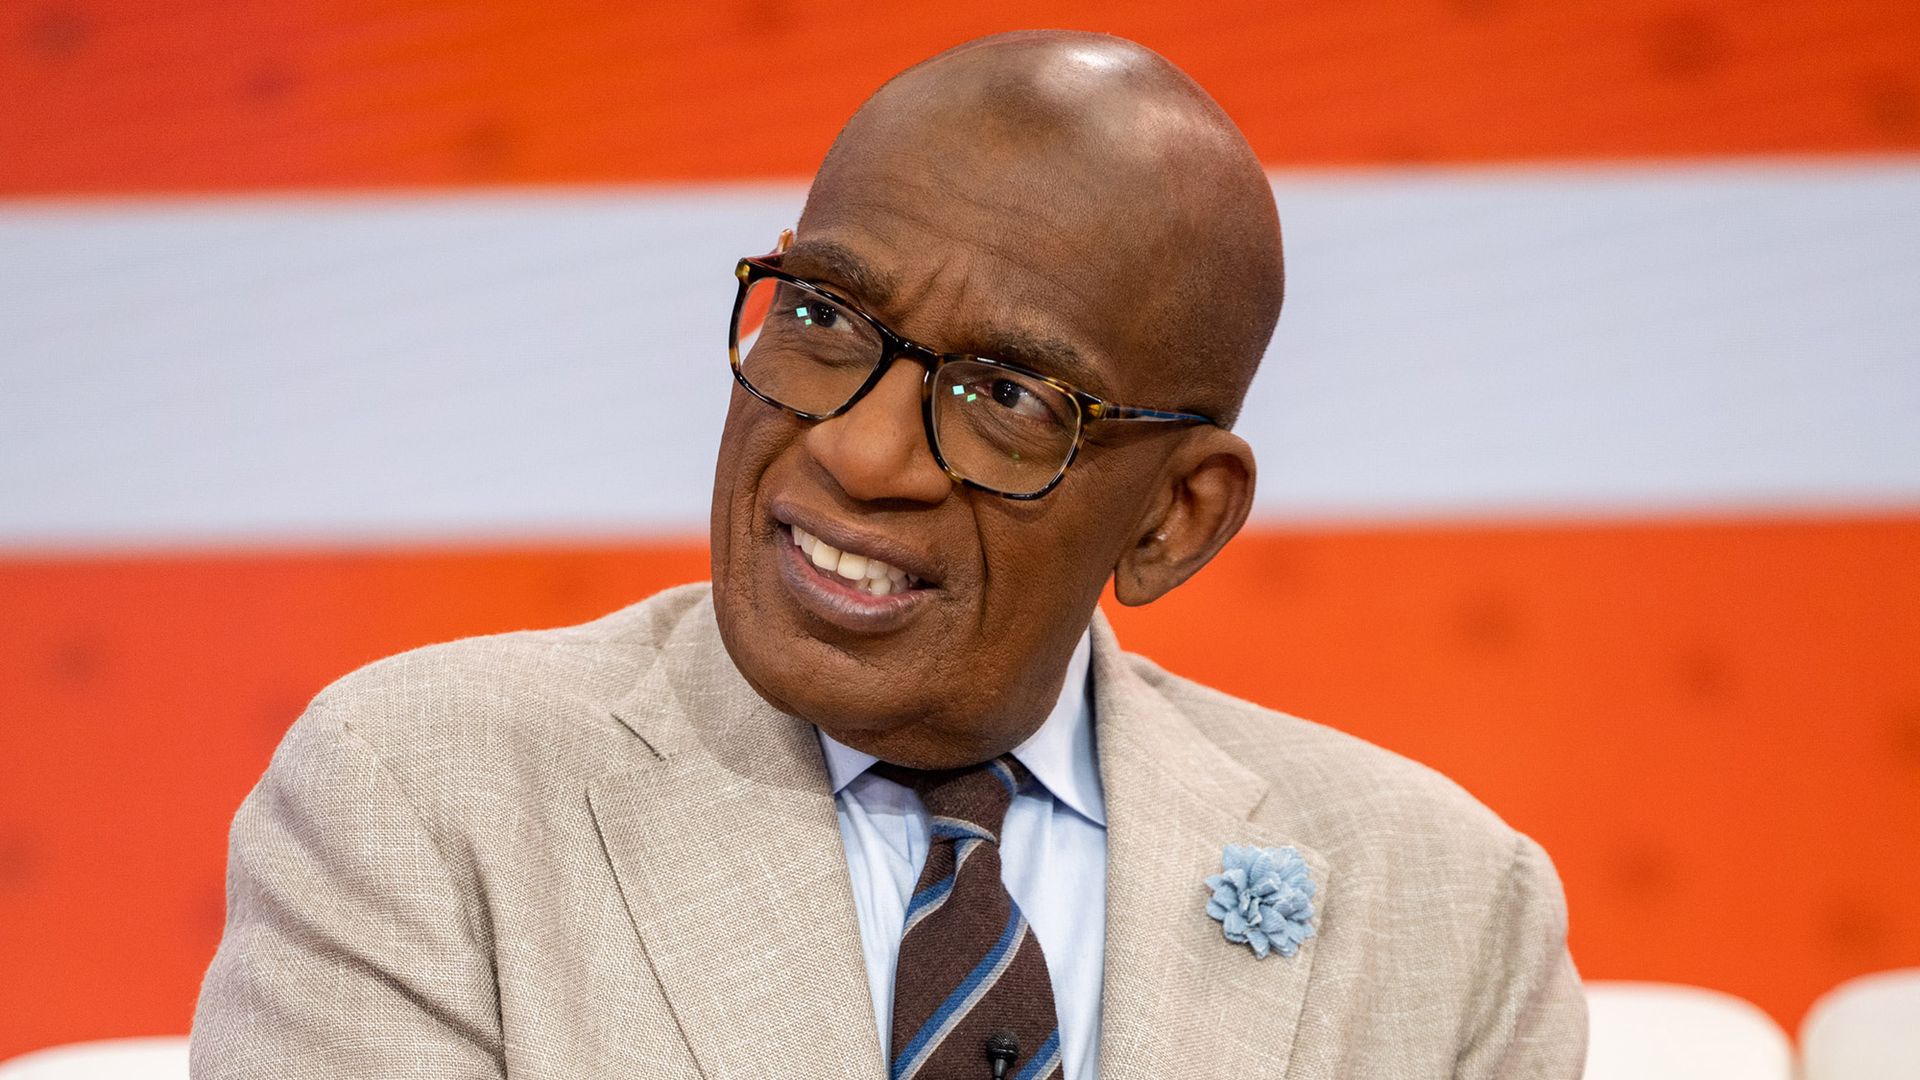 Today show dissolves into chaos as Al Roker declares 'this is the last edition of 3rd Hour of Today' — watch